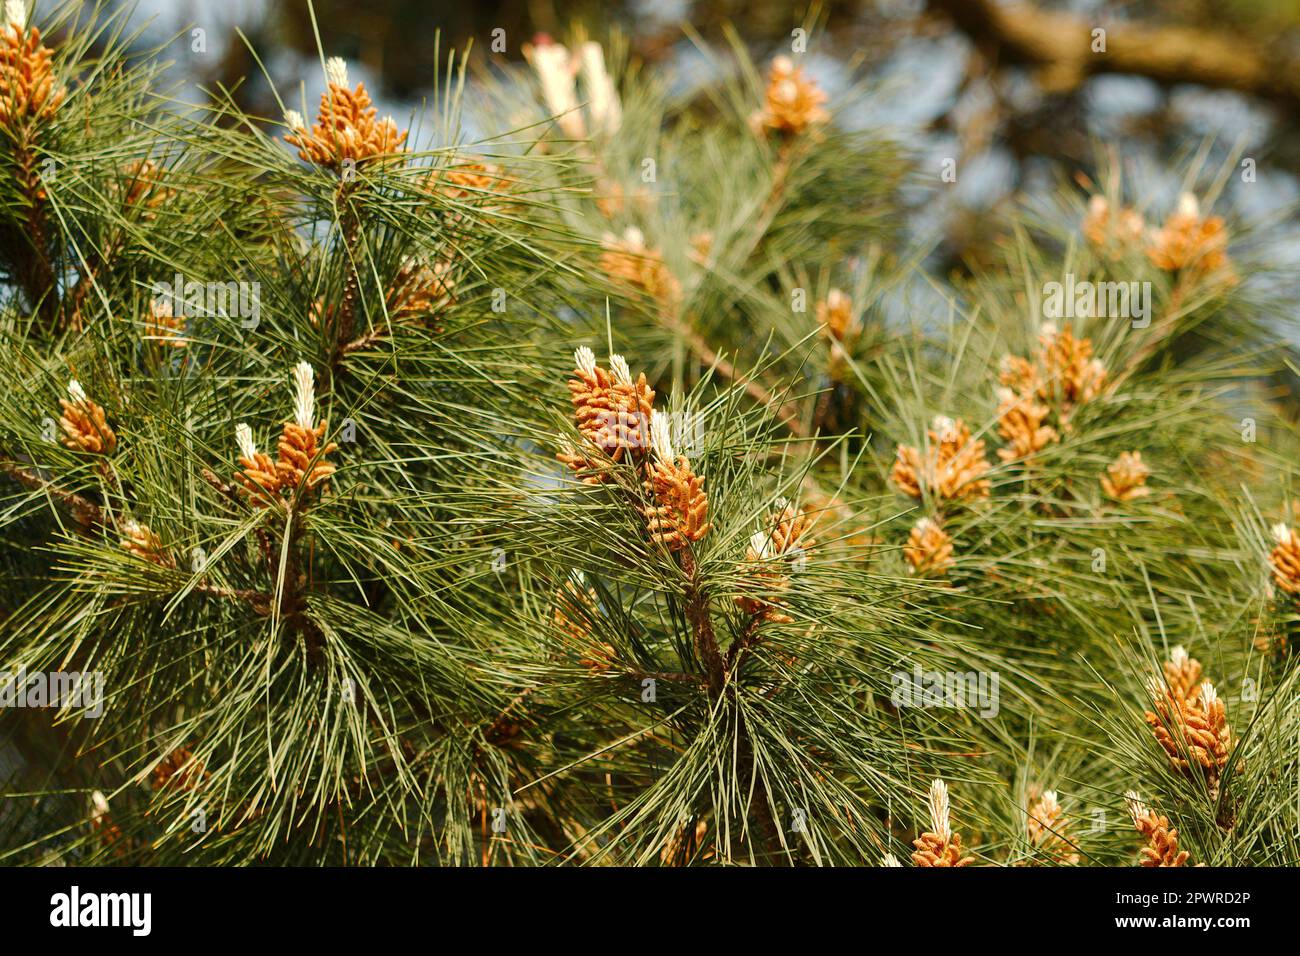 Pine tree flower in the Spring Stock Photo